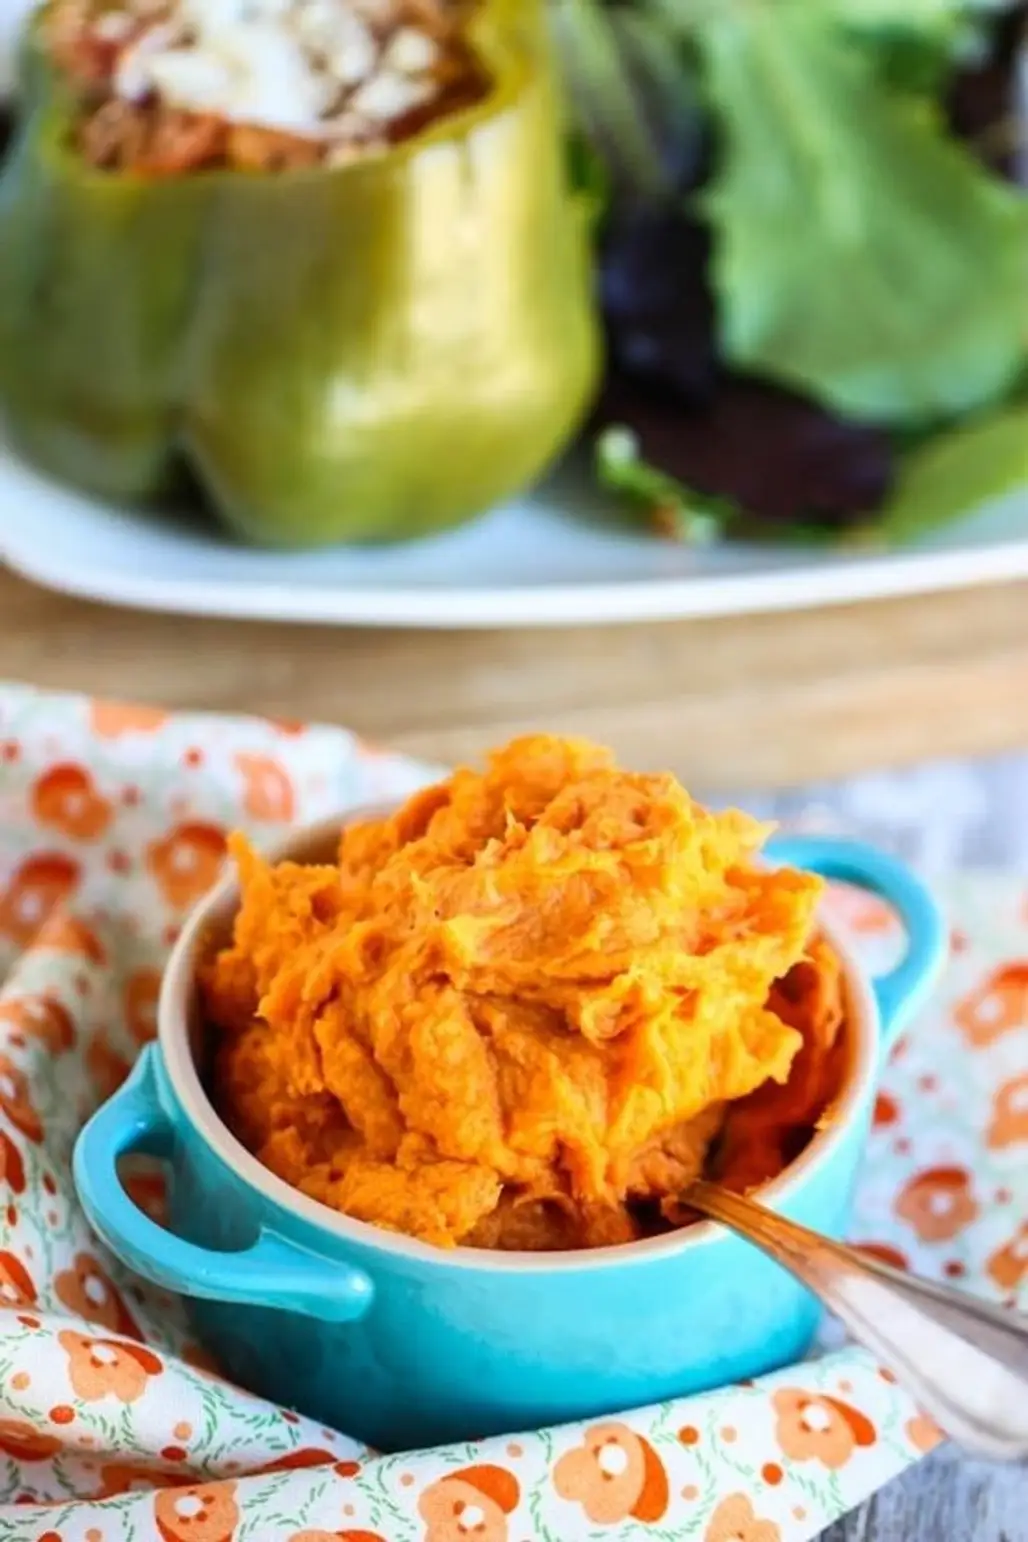 Swap Your Carbohydrate Craving for Sweet Potatoes